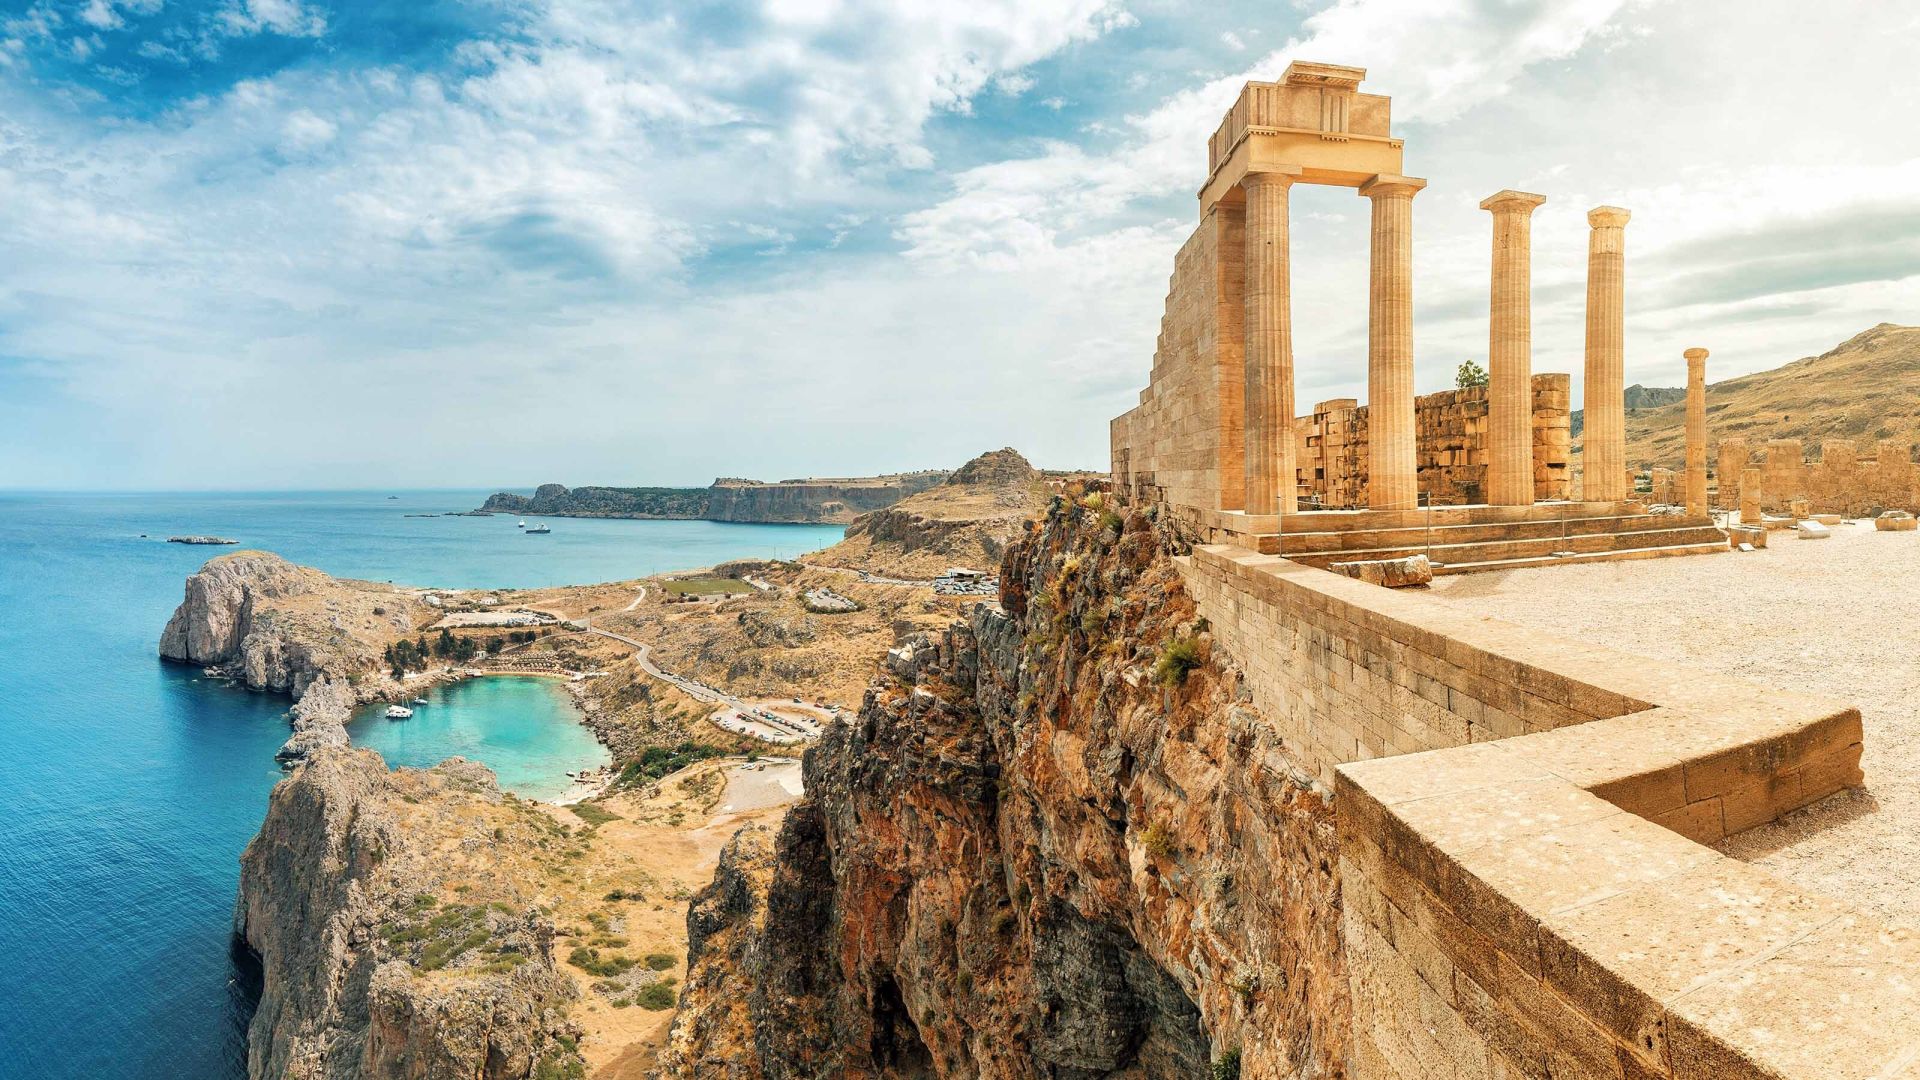 <p>                     <strong>Average daily cost: $131<br> Average accommodation cost: $93<br> Average daily meals cost: $34</strong>                   </p>                                      <p>                     From idyllic beaches to world-renowned historical sites, Greece is one of Europe’s top summer destinations for travelers. After the debt crisis in 2010, prices have been relatively low for years, but prices can vary widely depending on location — if you're heading for a holiday hotspot (like Mykonos or Santorini) expect to pay far more than for a lesser-known part of the country. Timing is also crucial when visiting this Mediterranean country. Try to avoid the high-season summer months to take advantage of the great prices.                   </p>